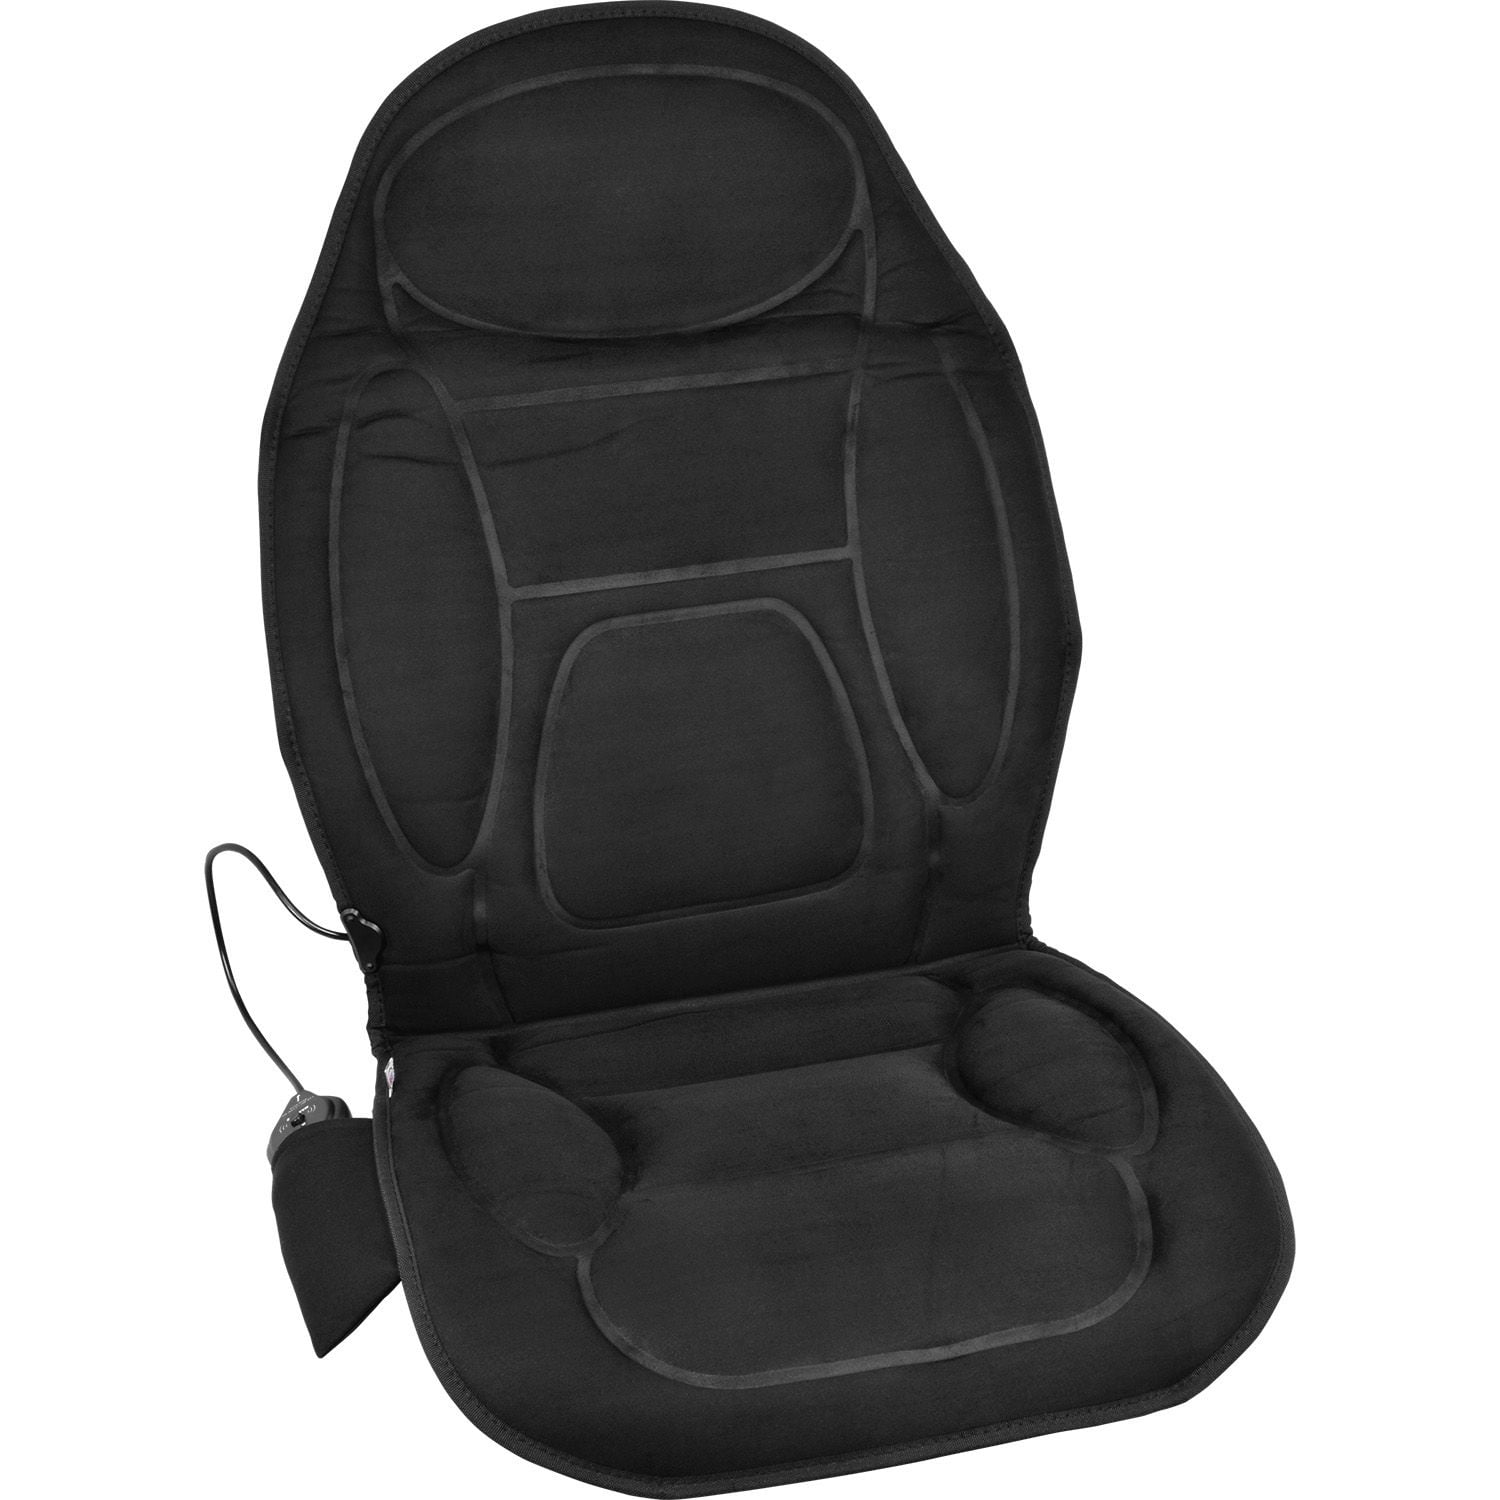  HxLmn Large Pressure Relief Office Car Seat Cushion